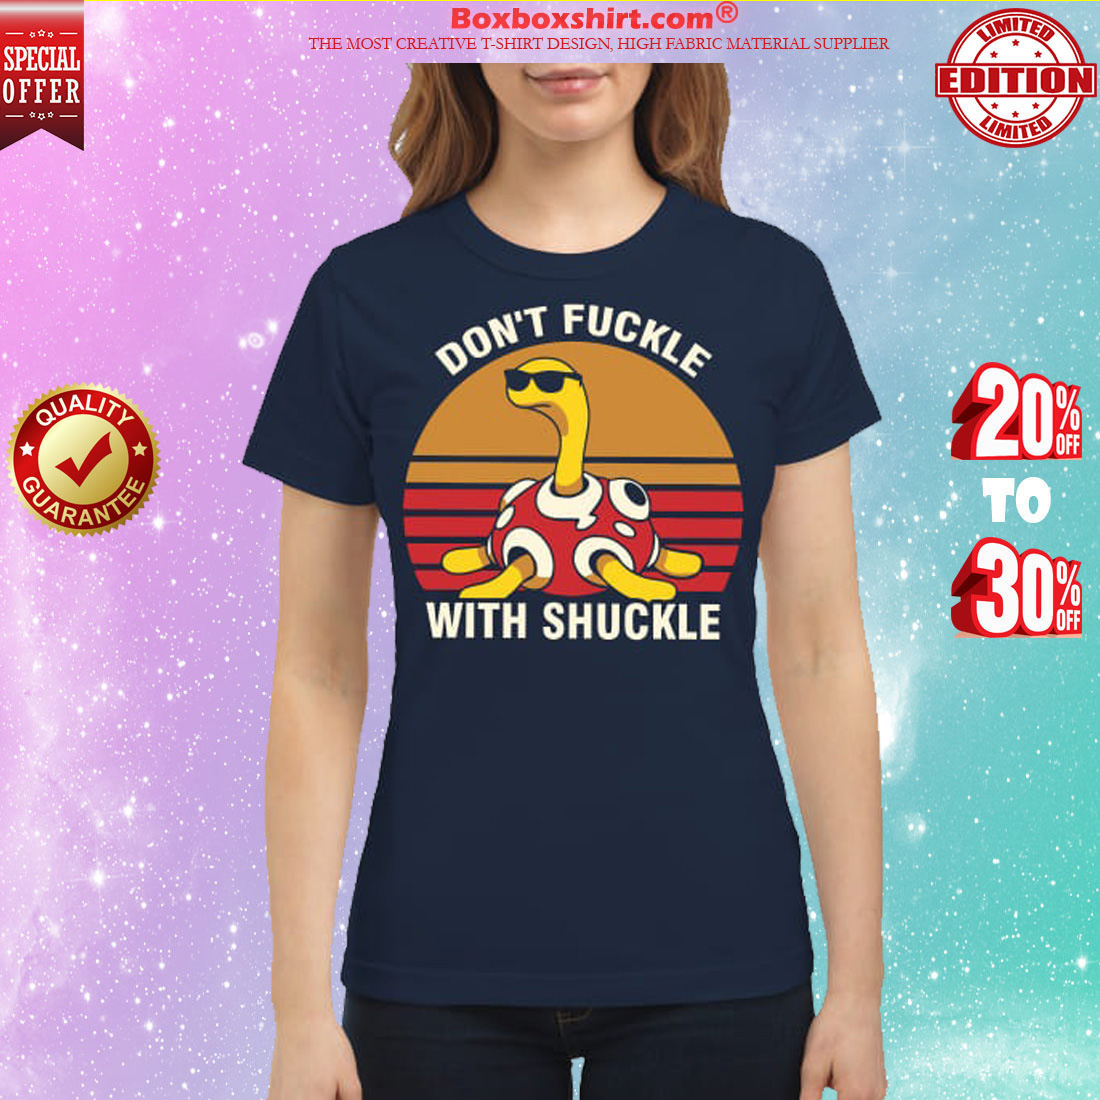 Don't fuckle with shuckle classic shirt